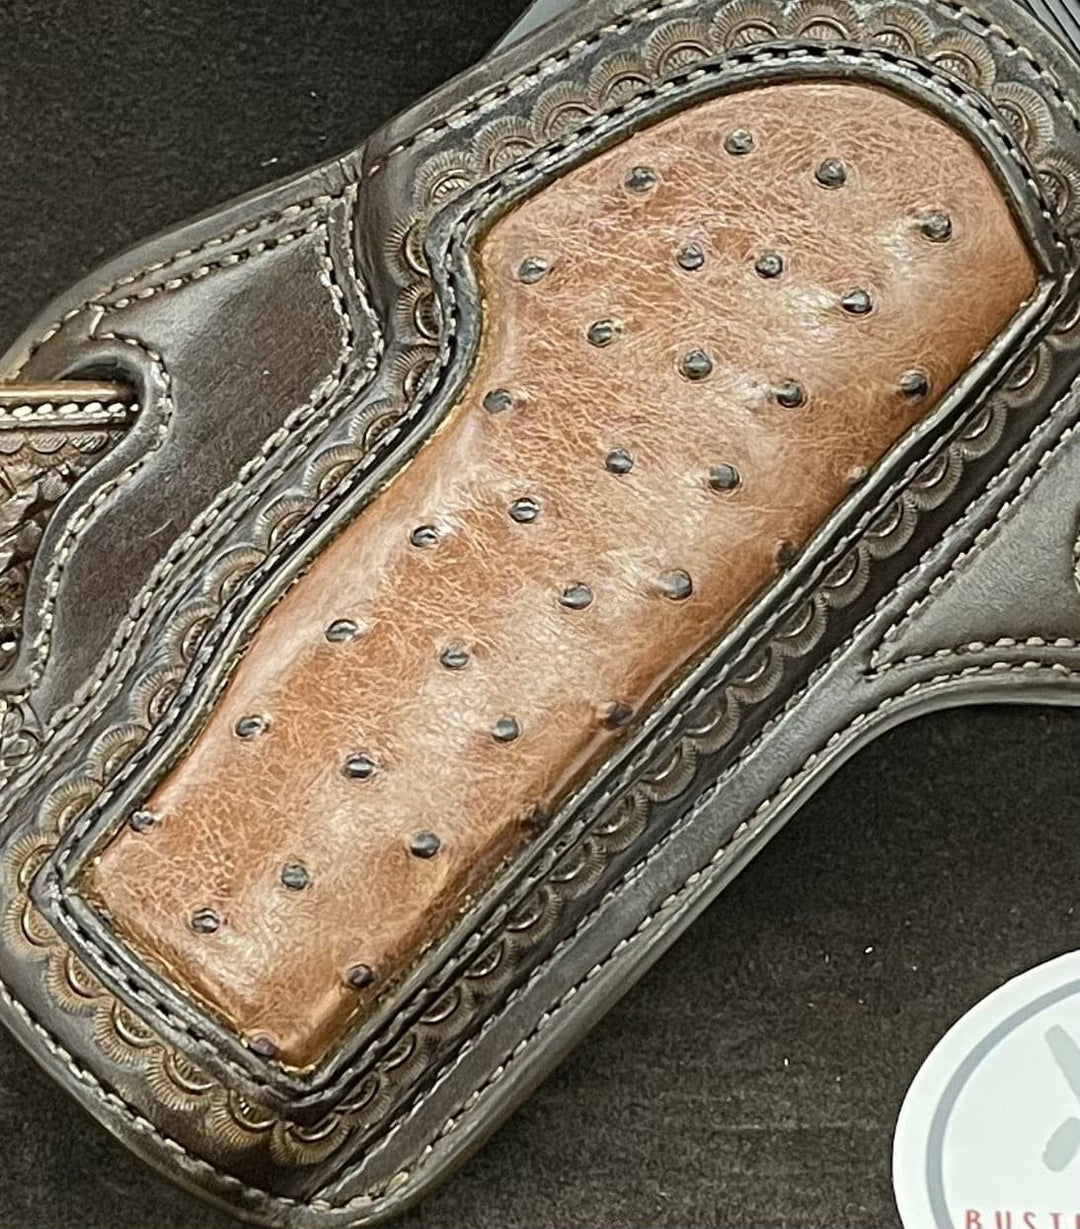 *Made to Order* LH/RH Texas Bodyguard Holster w/Genuine Ostrich Inlay Chocolate-Busted B Leather